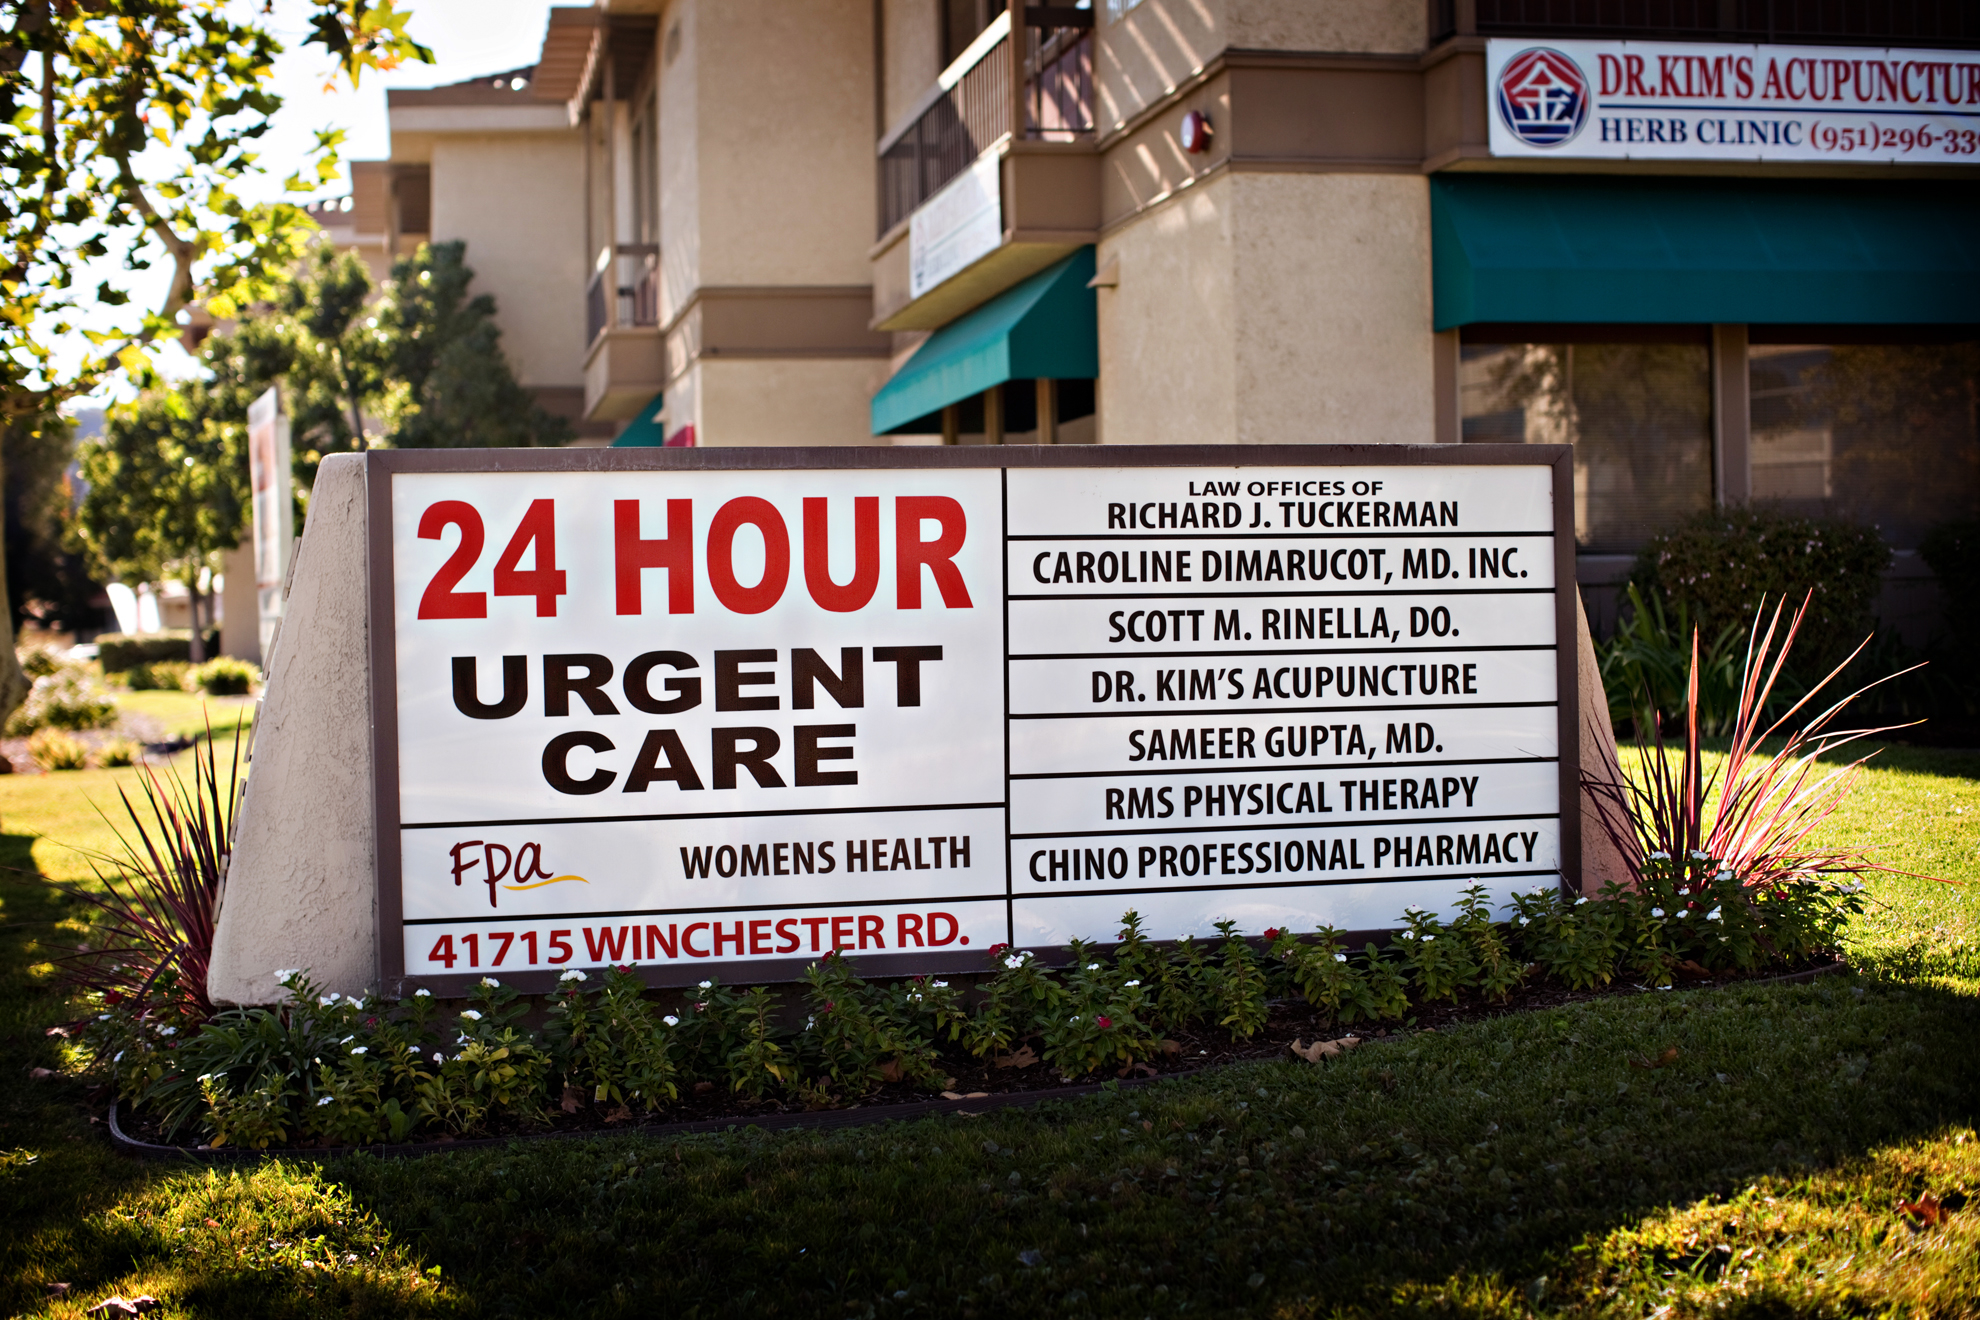 Temecula 24 Hour Urgent Care Coupons near me in Temecula, CA 92590 | 8coupons